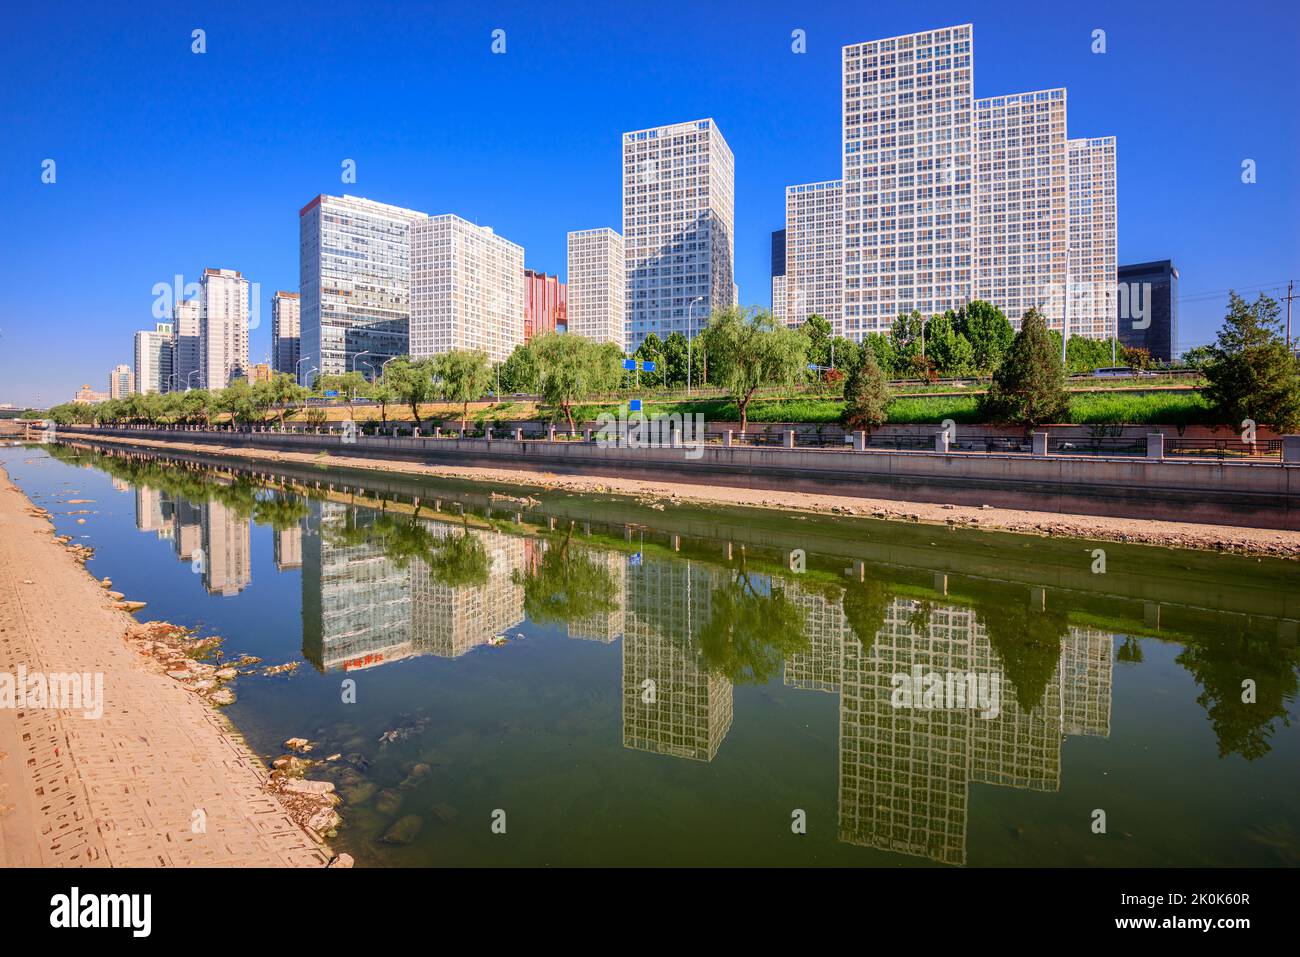 Beijing, China CBD city skyline and canal in the afternoon. Stock Photo